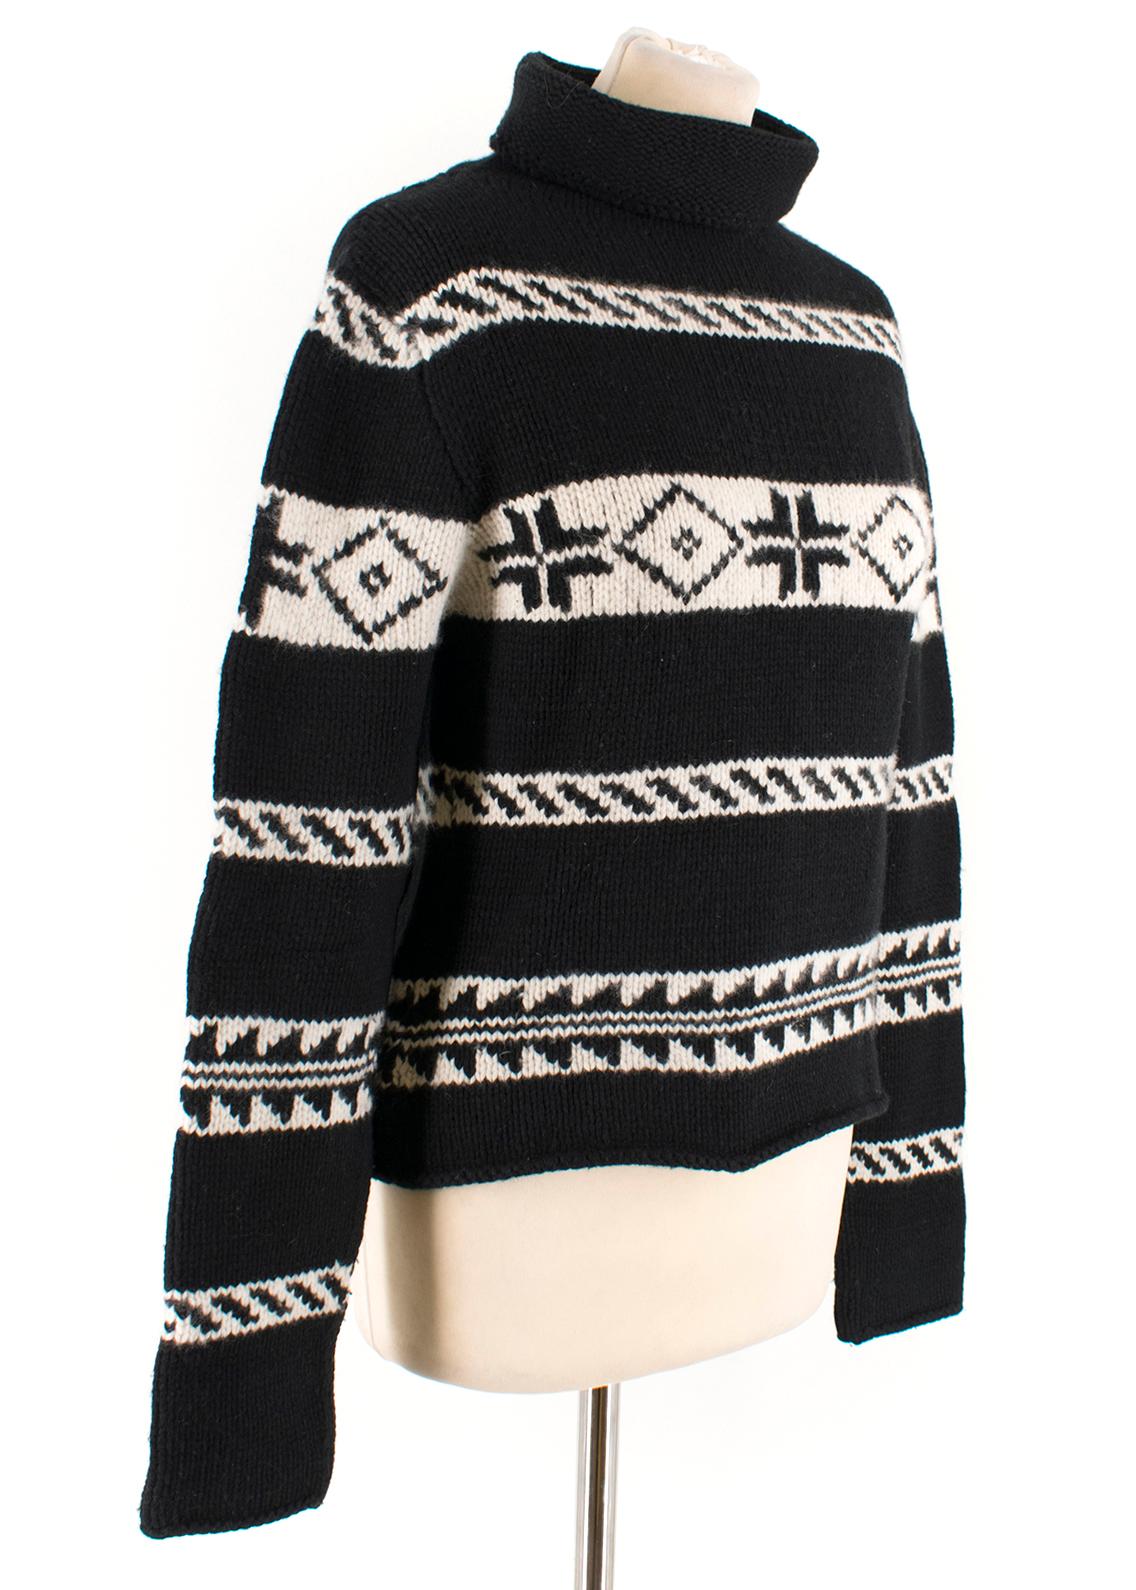 Ralph Lauren Collection Cashmere Patterned Chunky Roll-neck Jumper

- Pure cashmere
- Chunky knit
- Roll-neck
- Regular fit
- Black & white striped with patterning

Please note, these items are pre-owned and may show some signs of storage, even when